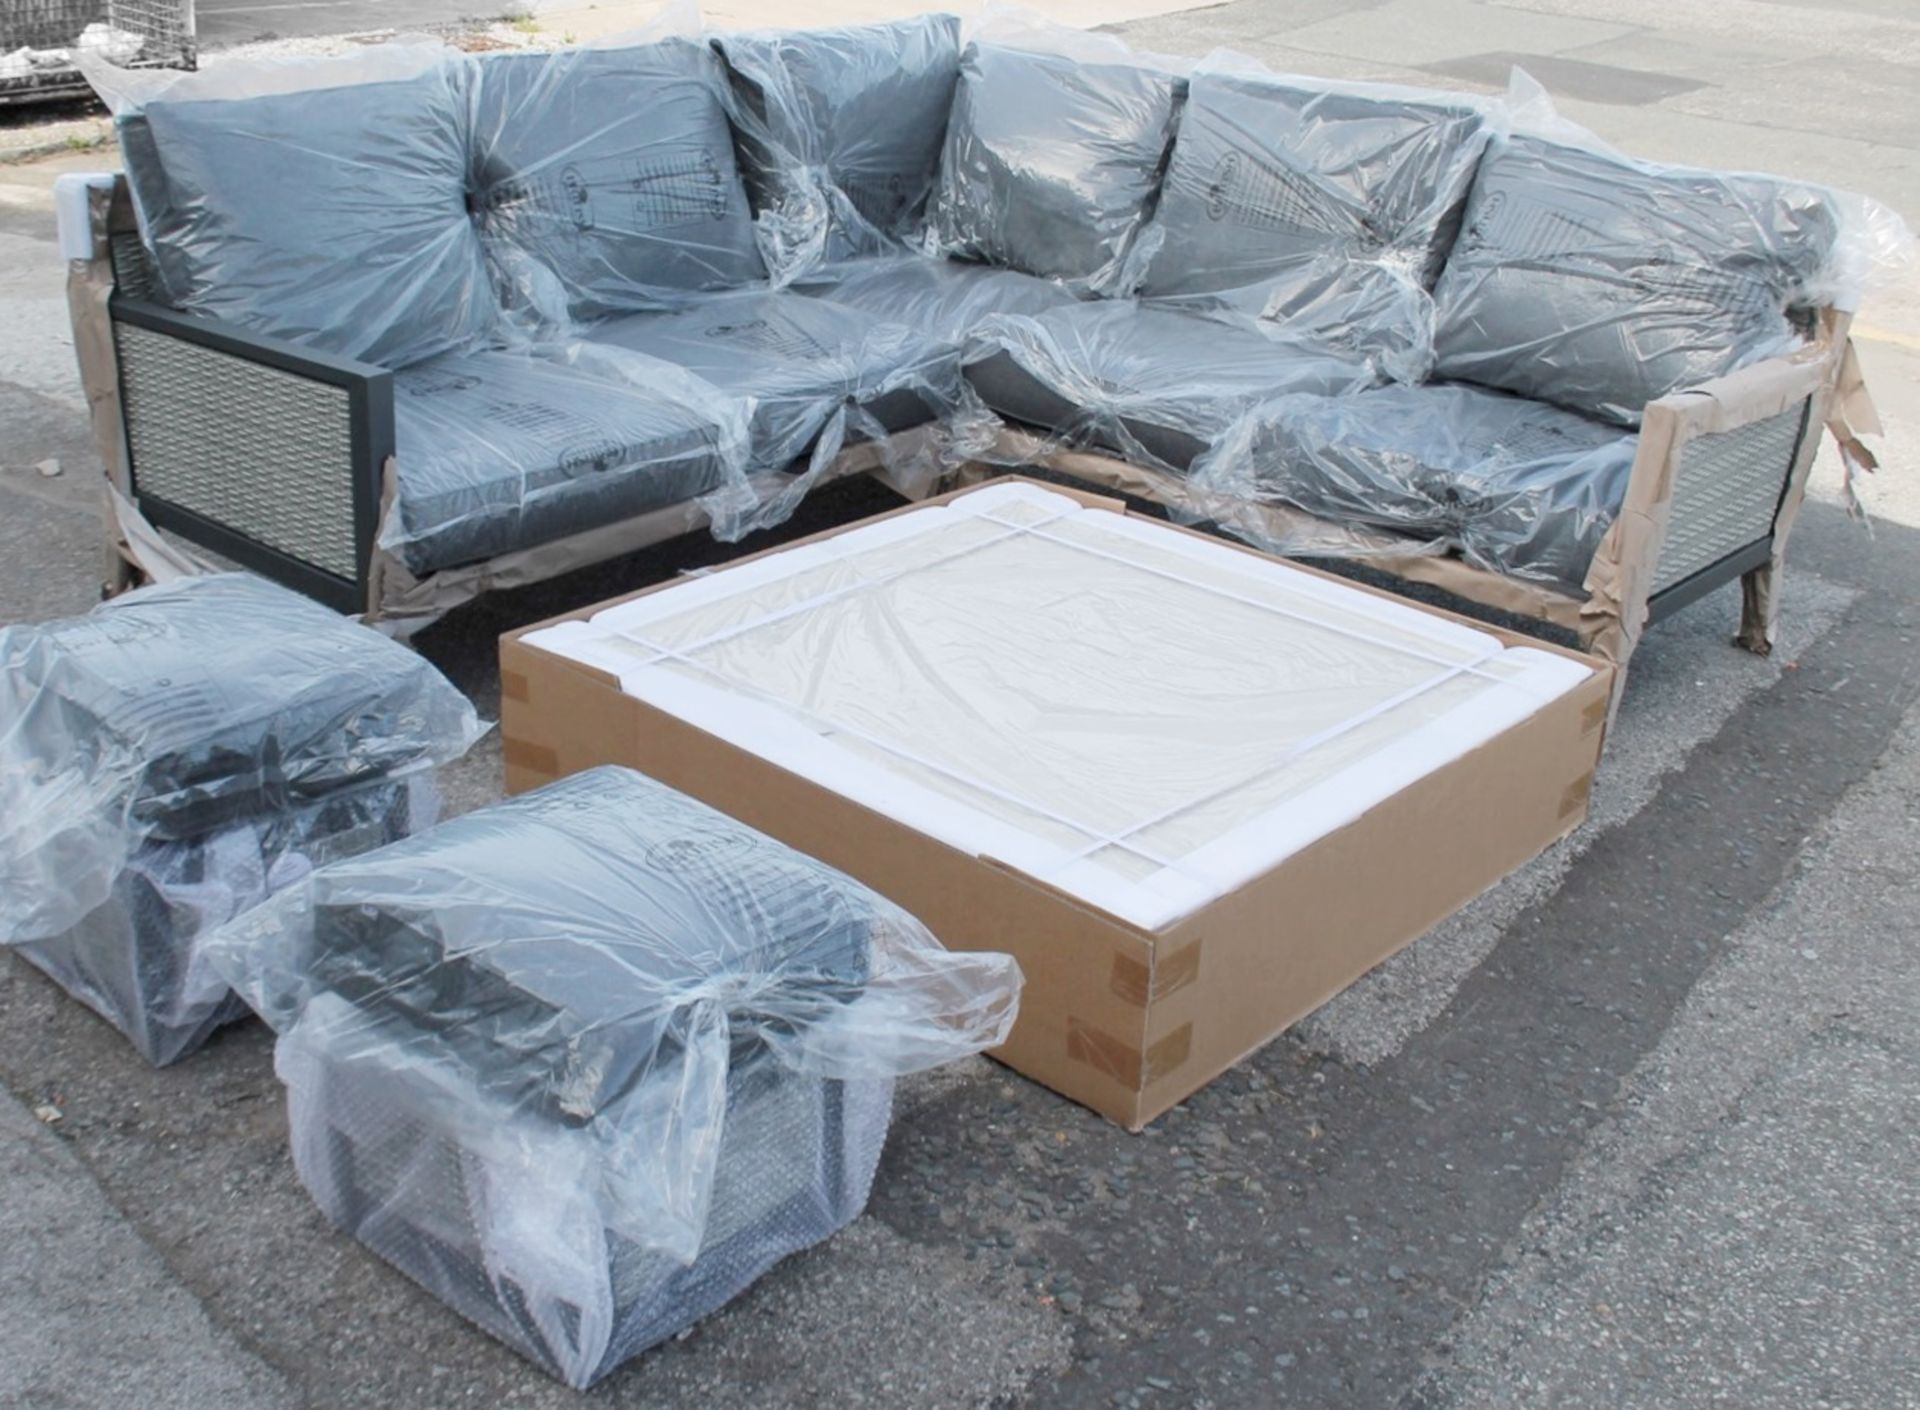 1 x HARTMANN 'Nouveau Square' Firepit Garden Furniture Set With Corner Sofa - New/Boxed - RRP £3,299 - Image 2 of 21